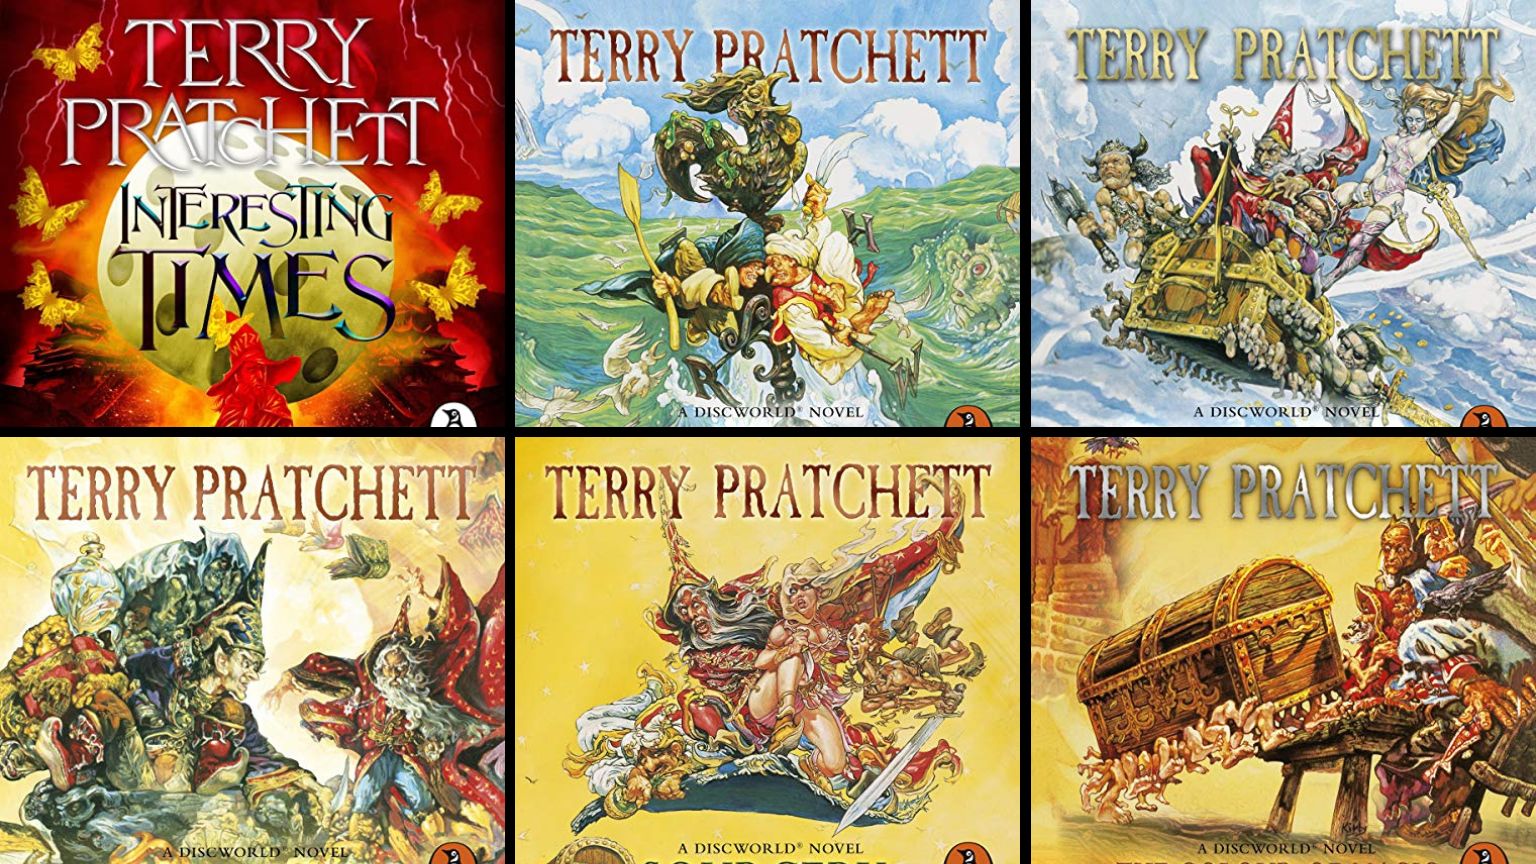 Terry Pratchett Audiobooks Are Hit With Trigger Warnings